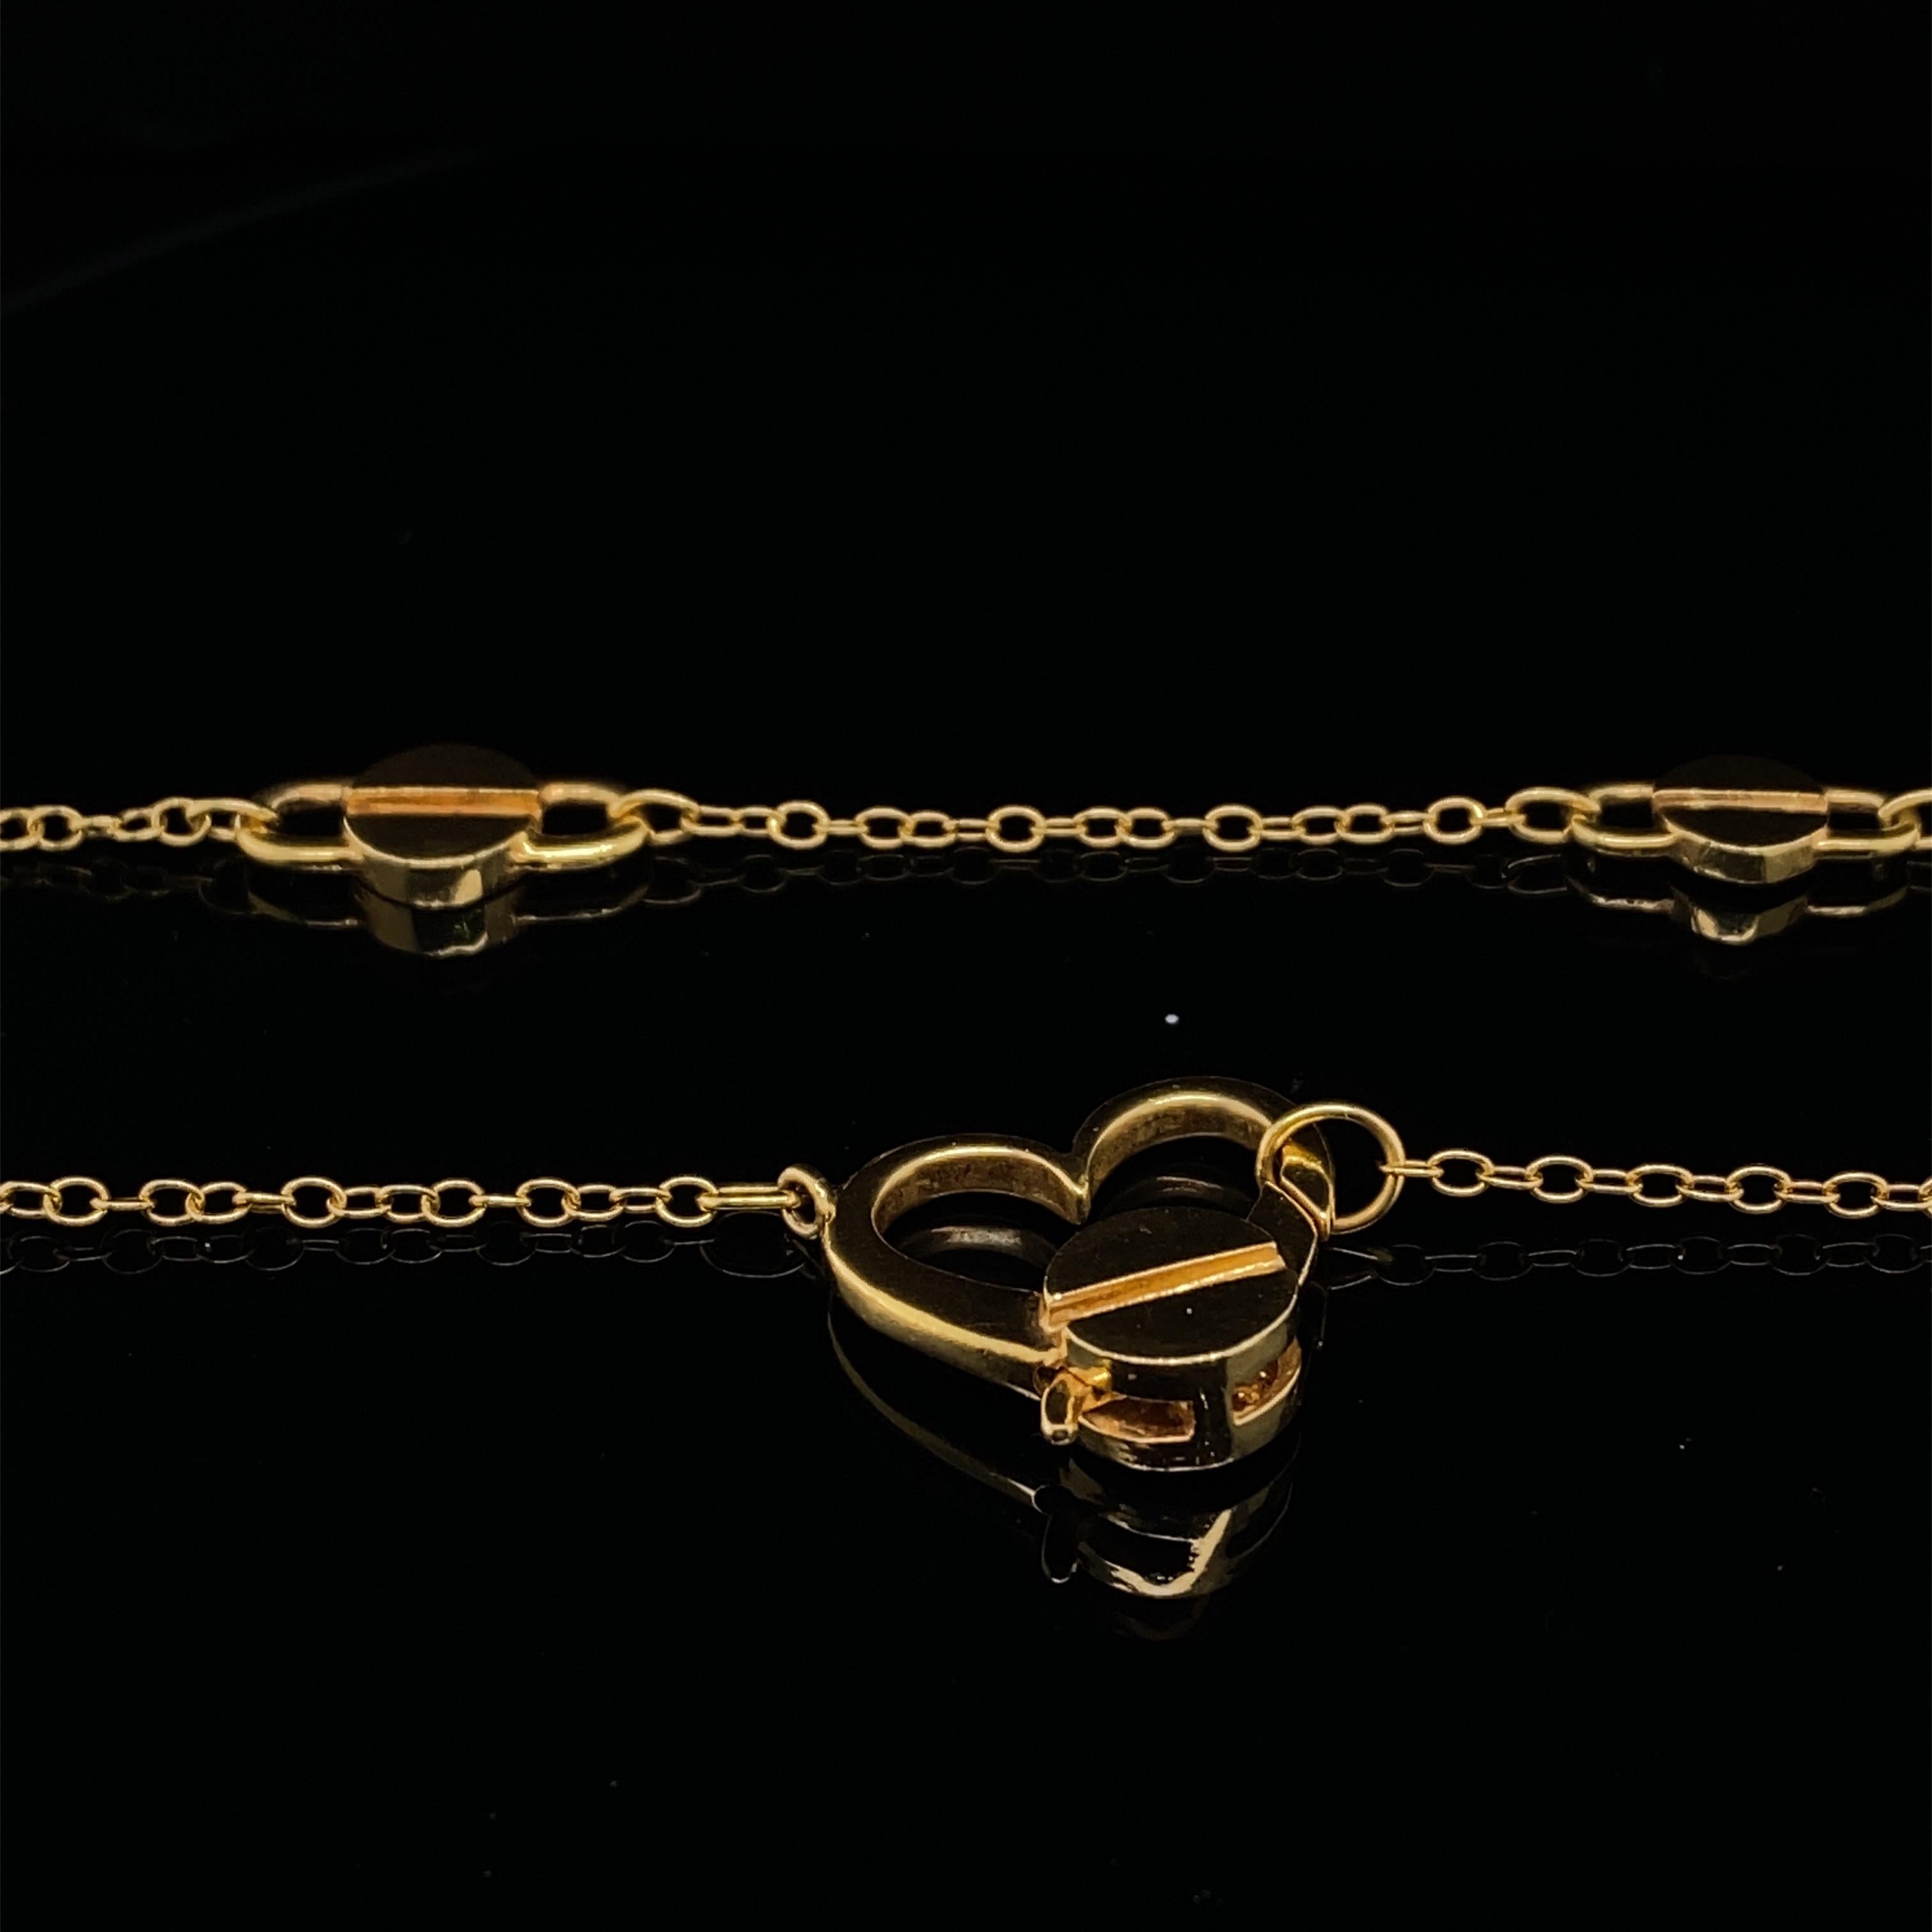 An Aldo Cipullo Long Love chain in 18 karat gold.

A stylish and ultra rare gold longchain by Aldo Cipullo.  The 18 karat yellow gold long chain is 36 inches in length and interspaced with Cipullo's iconic screw heads and terminating in a